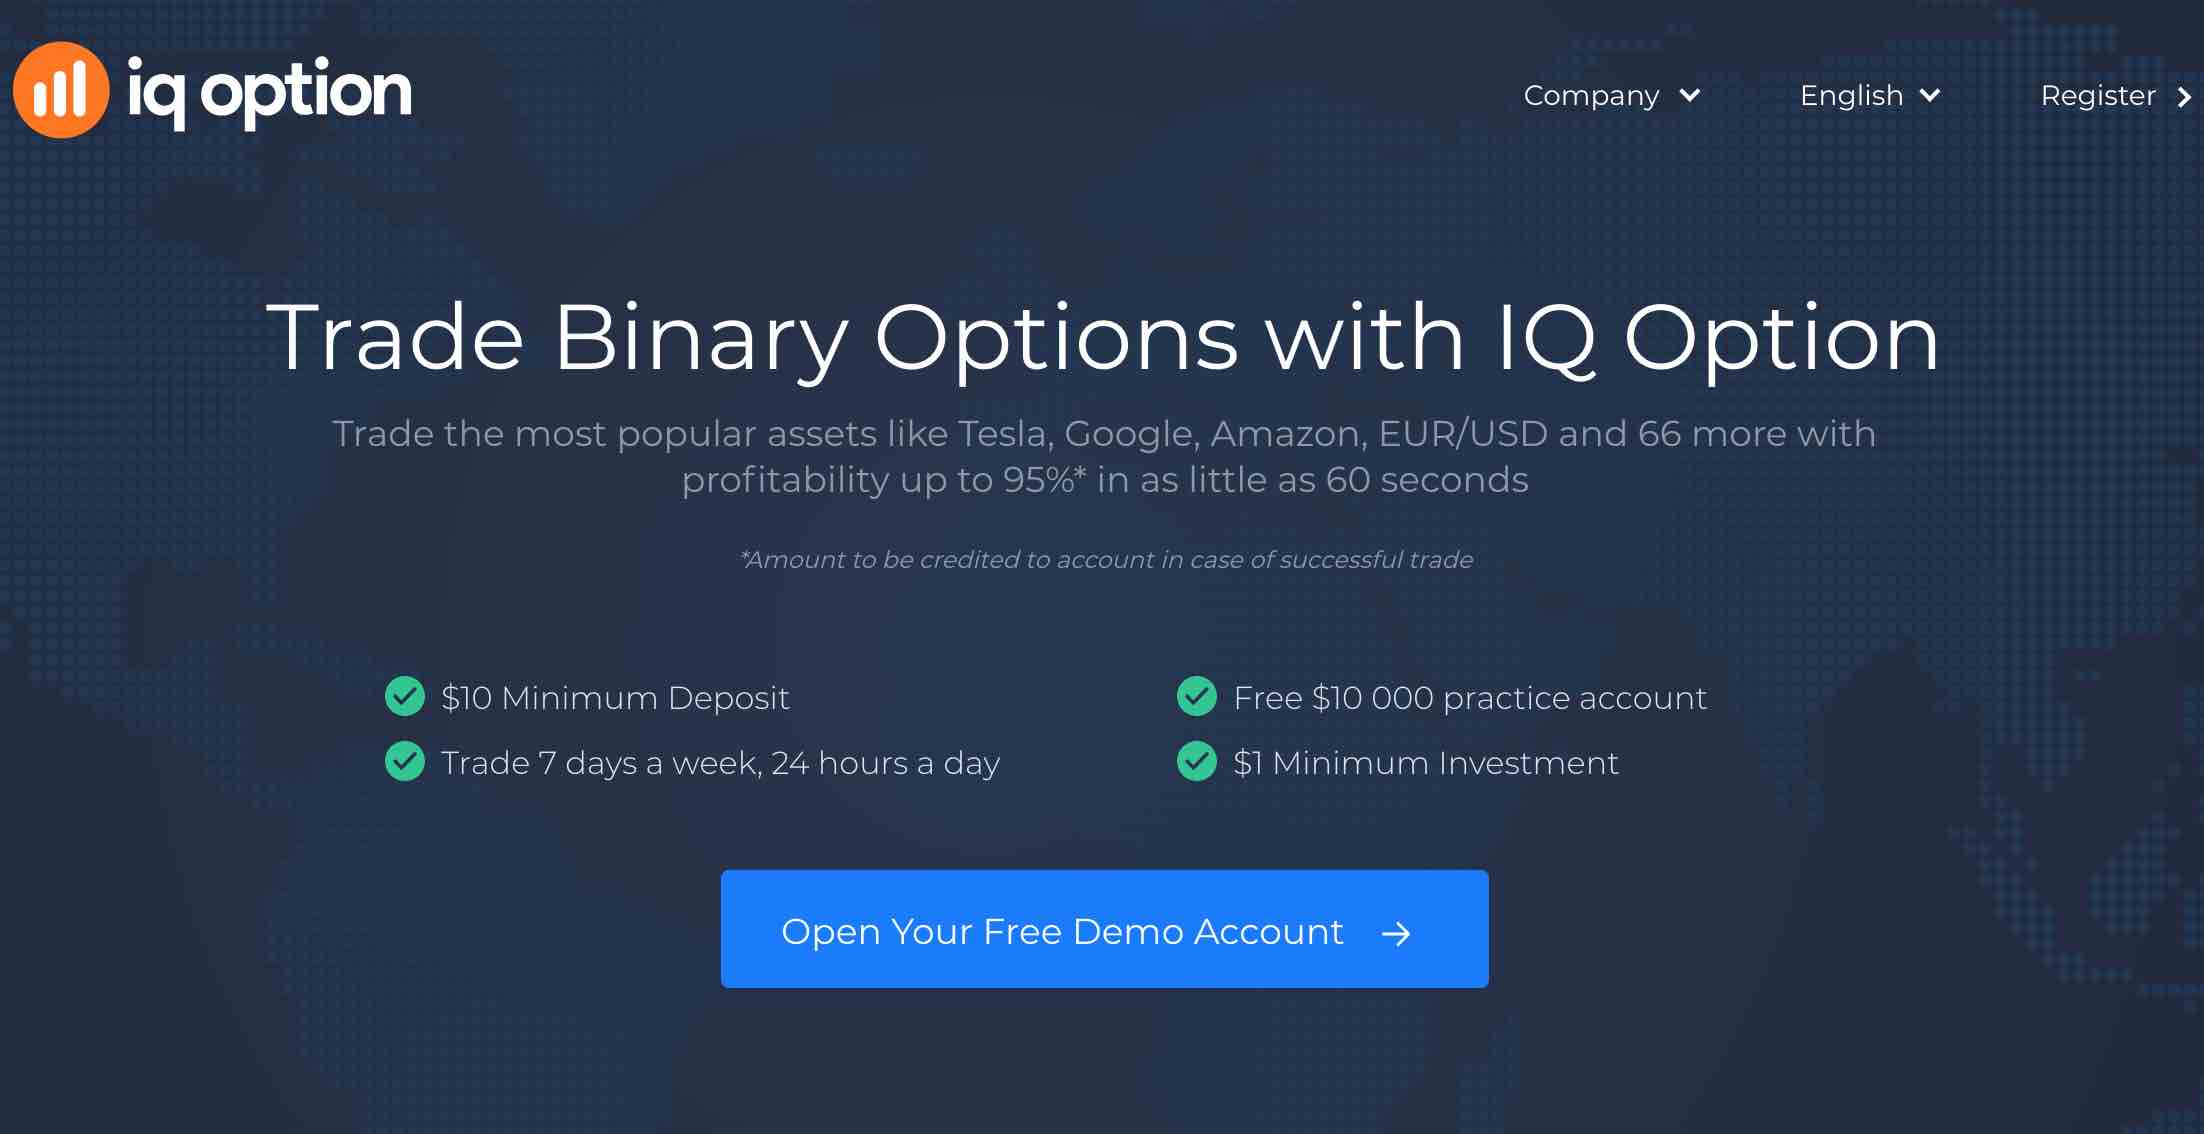 IQ option is one of the best online trading platforms in Nigeria